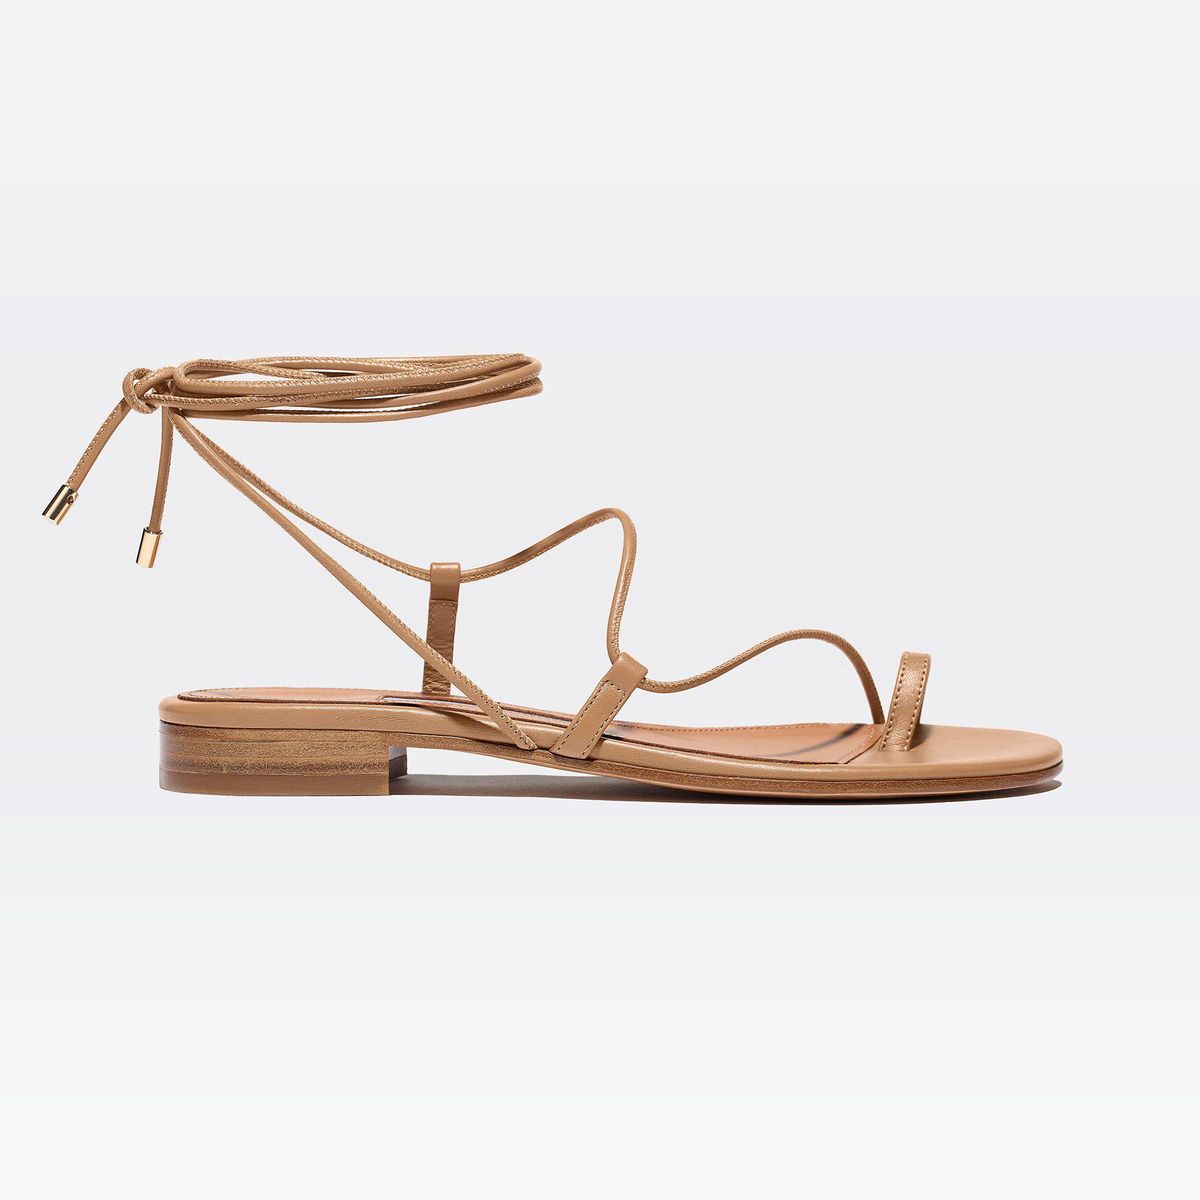 emme parsons susan in tan nappa